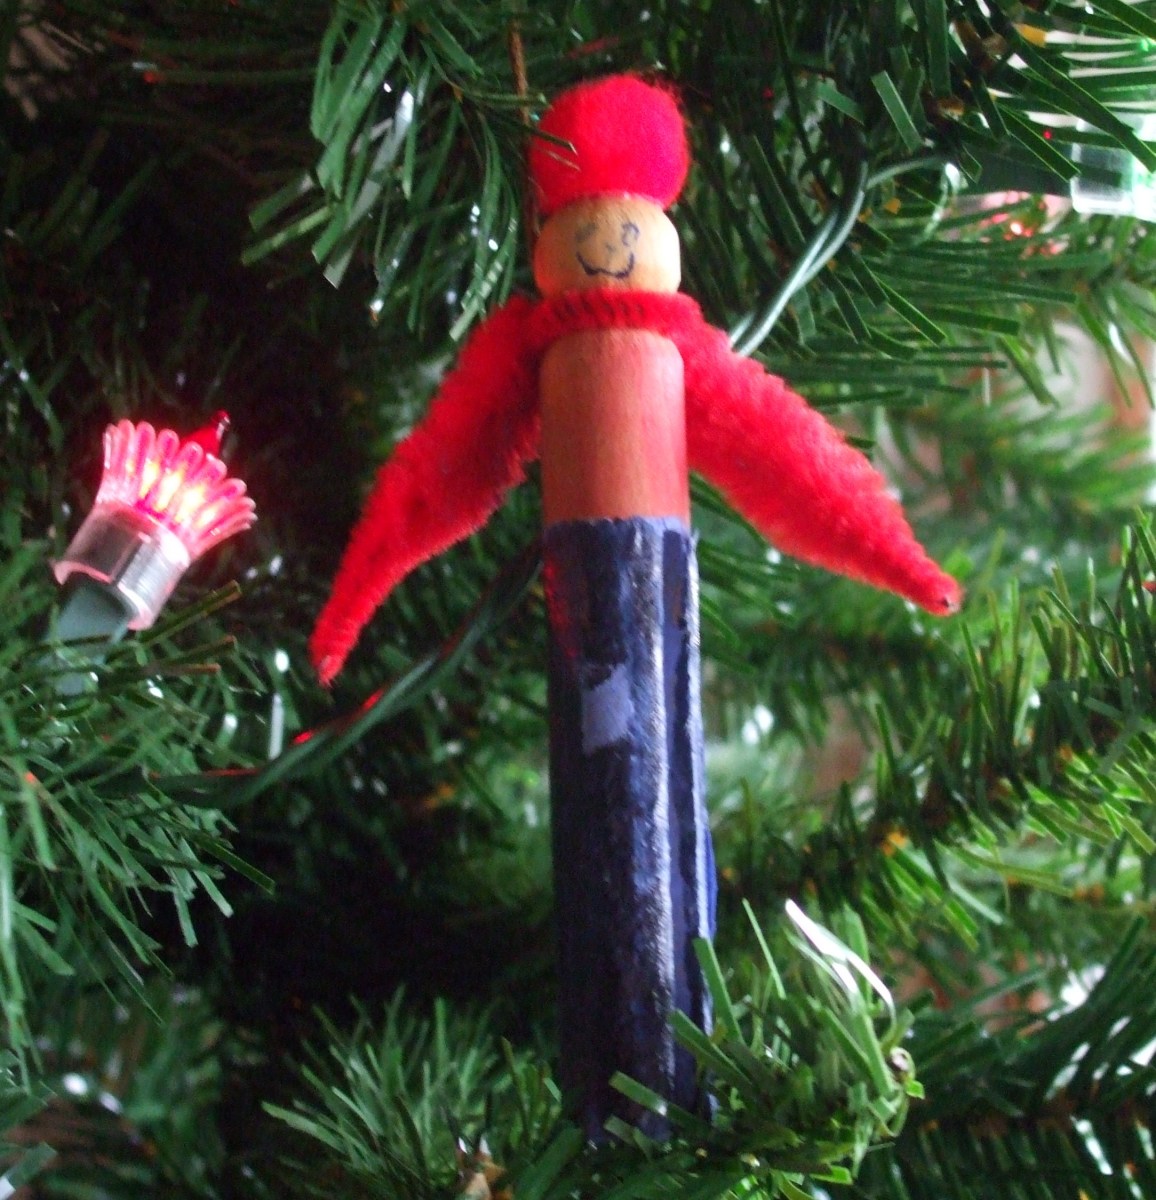 Hanging on the Christmas tree, this clothespin ornament keeps watch.